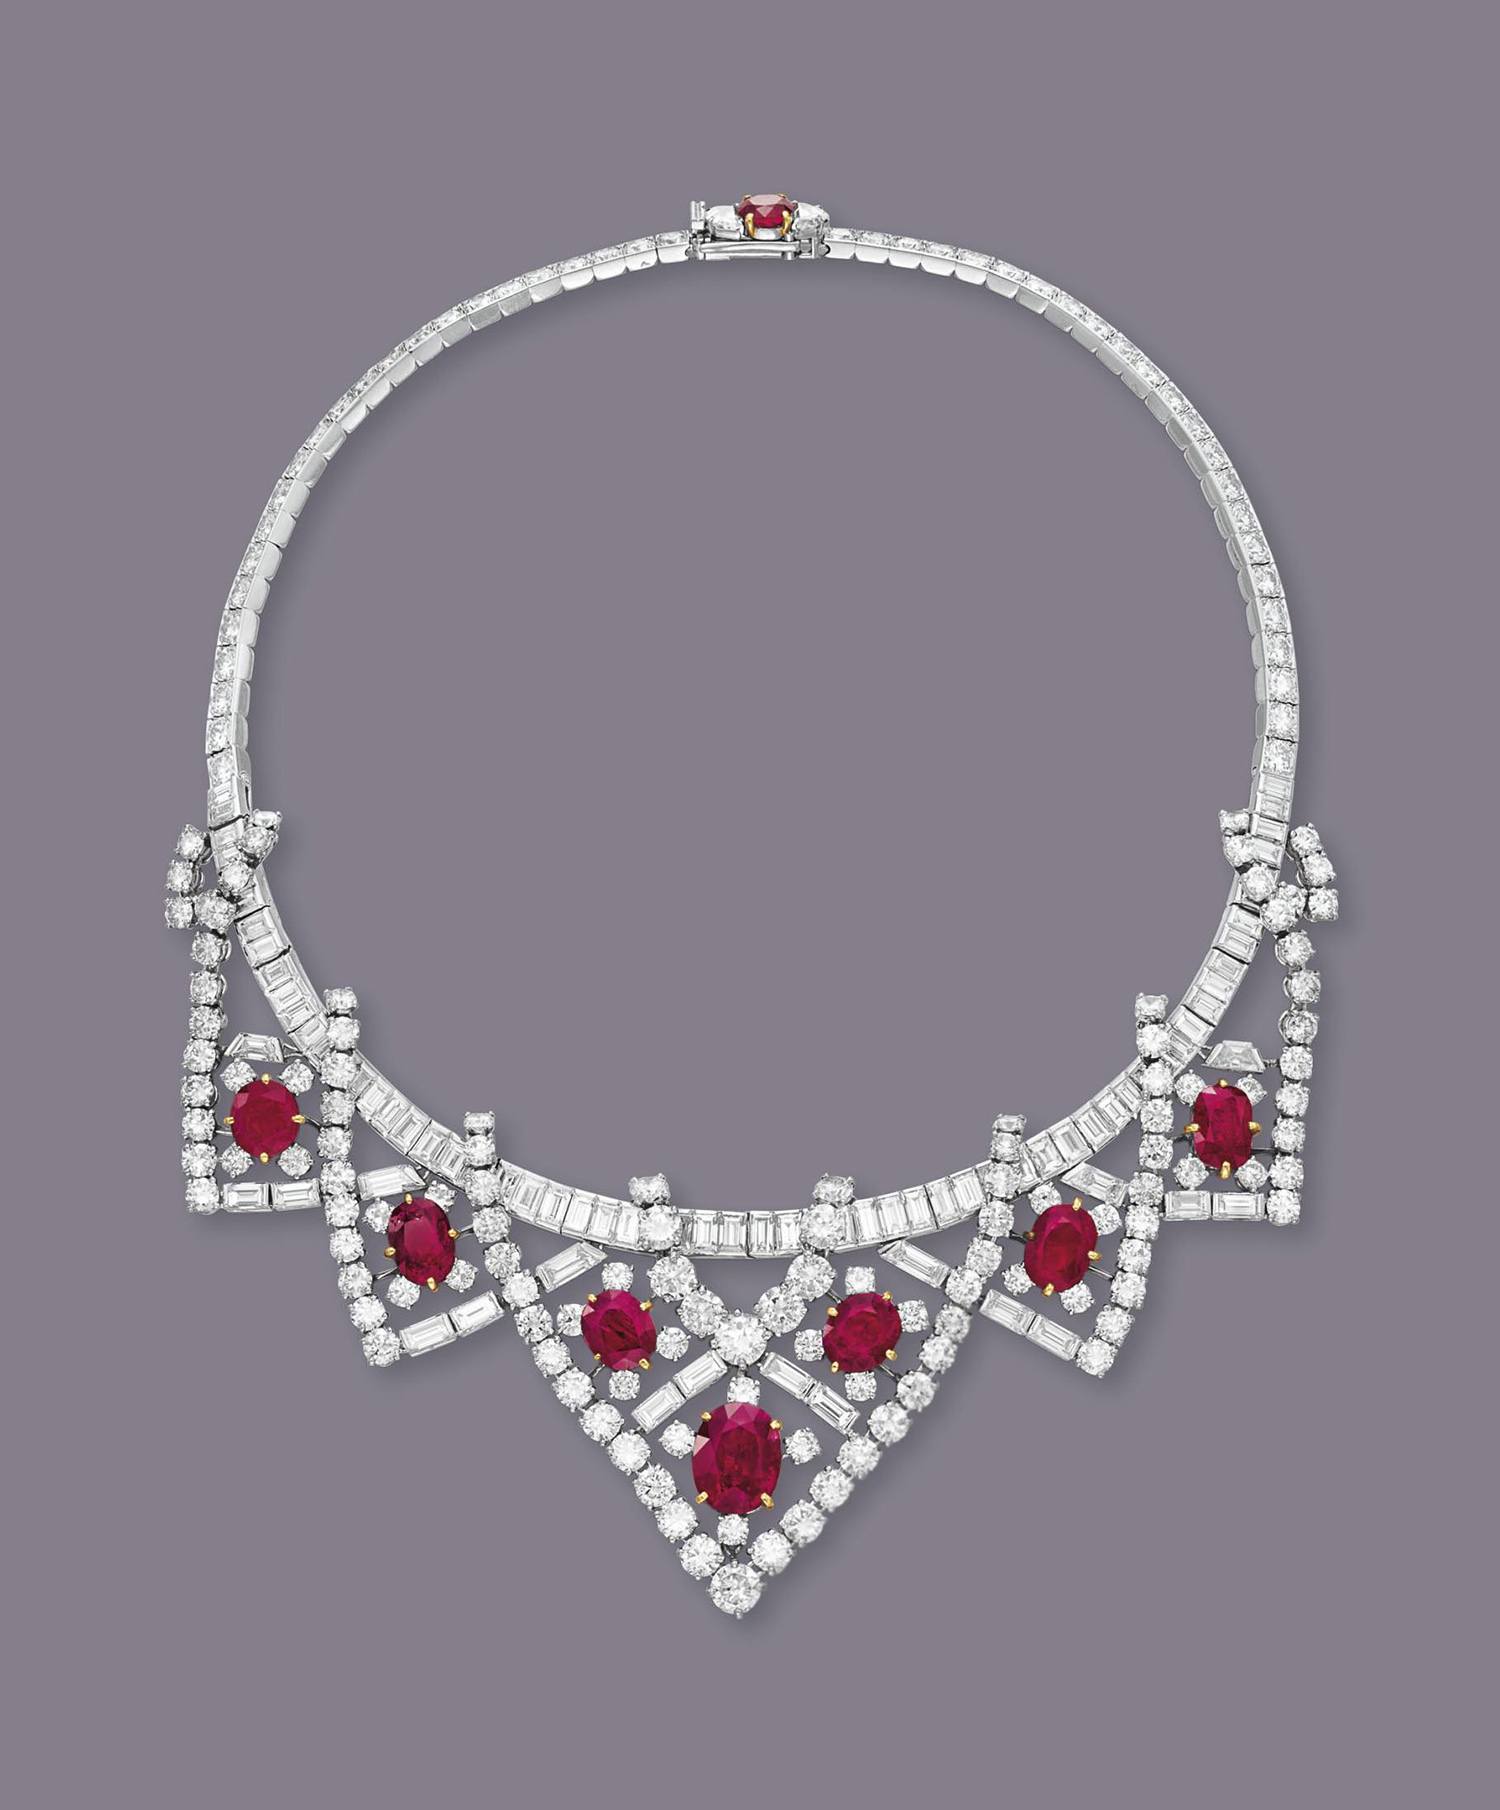 Louis Vuitton on X: Red planet. #LouisVuitton's Astre Rouge necklace  showcases an exceptional 8.06 carat ruby against a cascade of diamonds,  evoking the planet Mars in a shower of light. Explore the